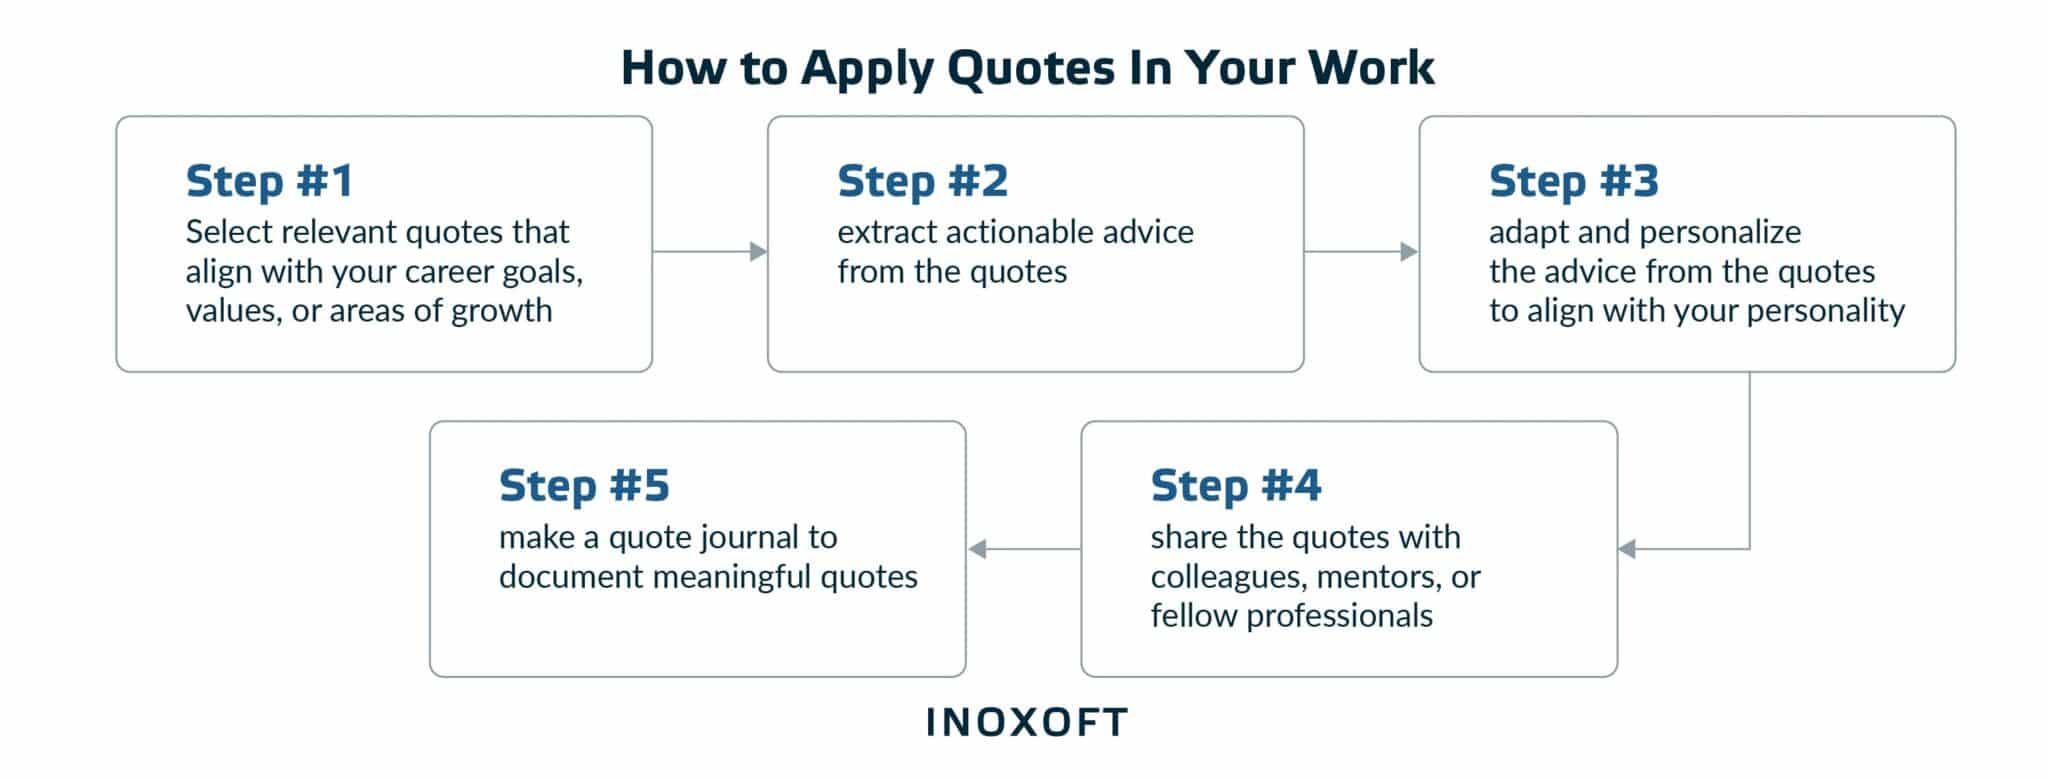 How to Apply Quotes In Your Work